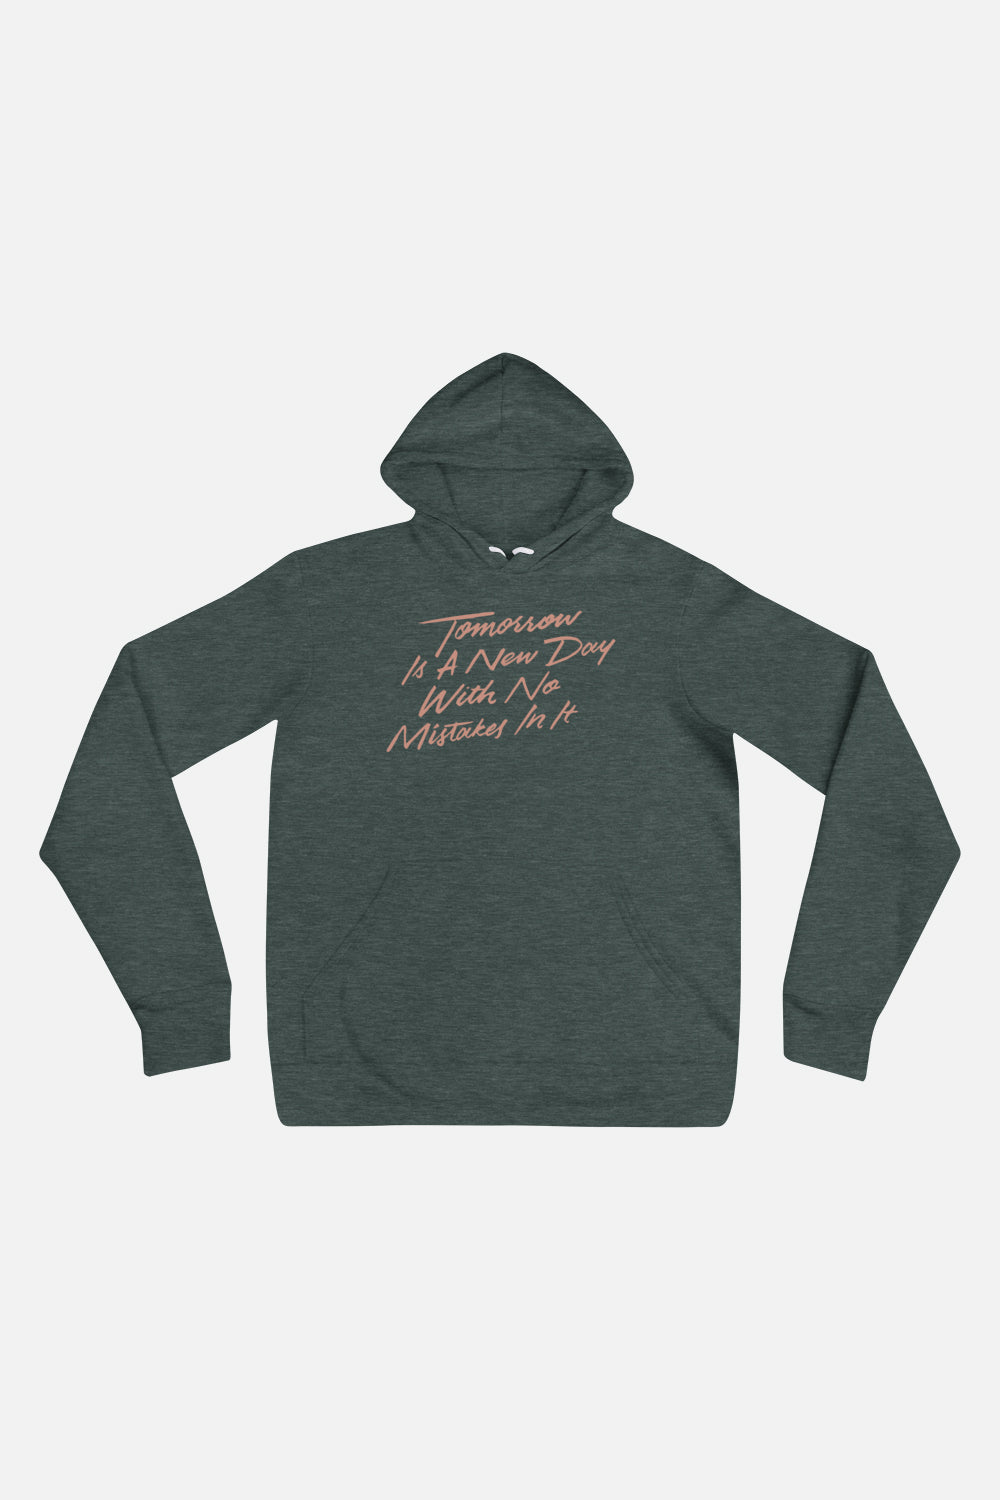 Tomorrow is a New Day Unisex Hoodie | Anne of Green Gables